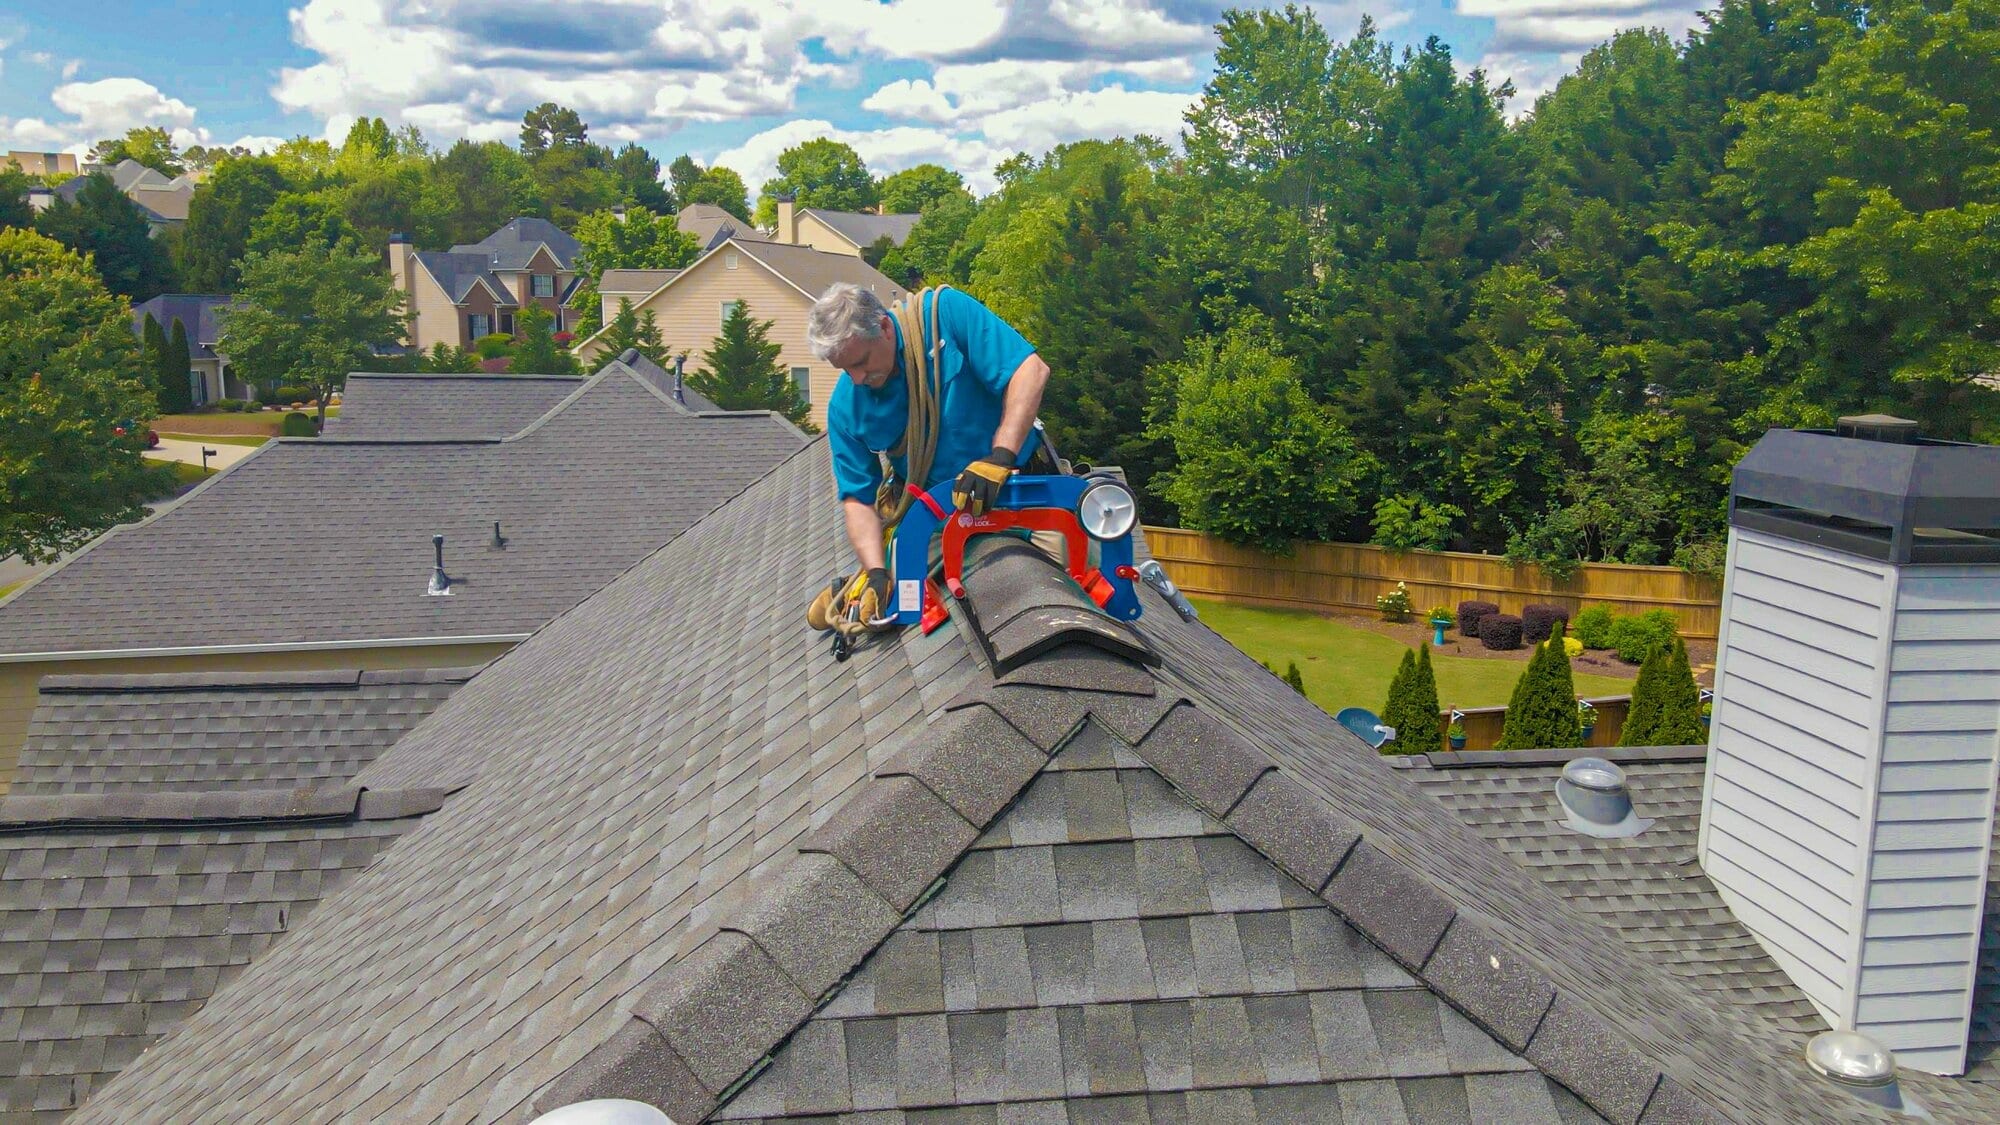 Top Roofing Tools & Safety Equipment for Roofers